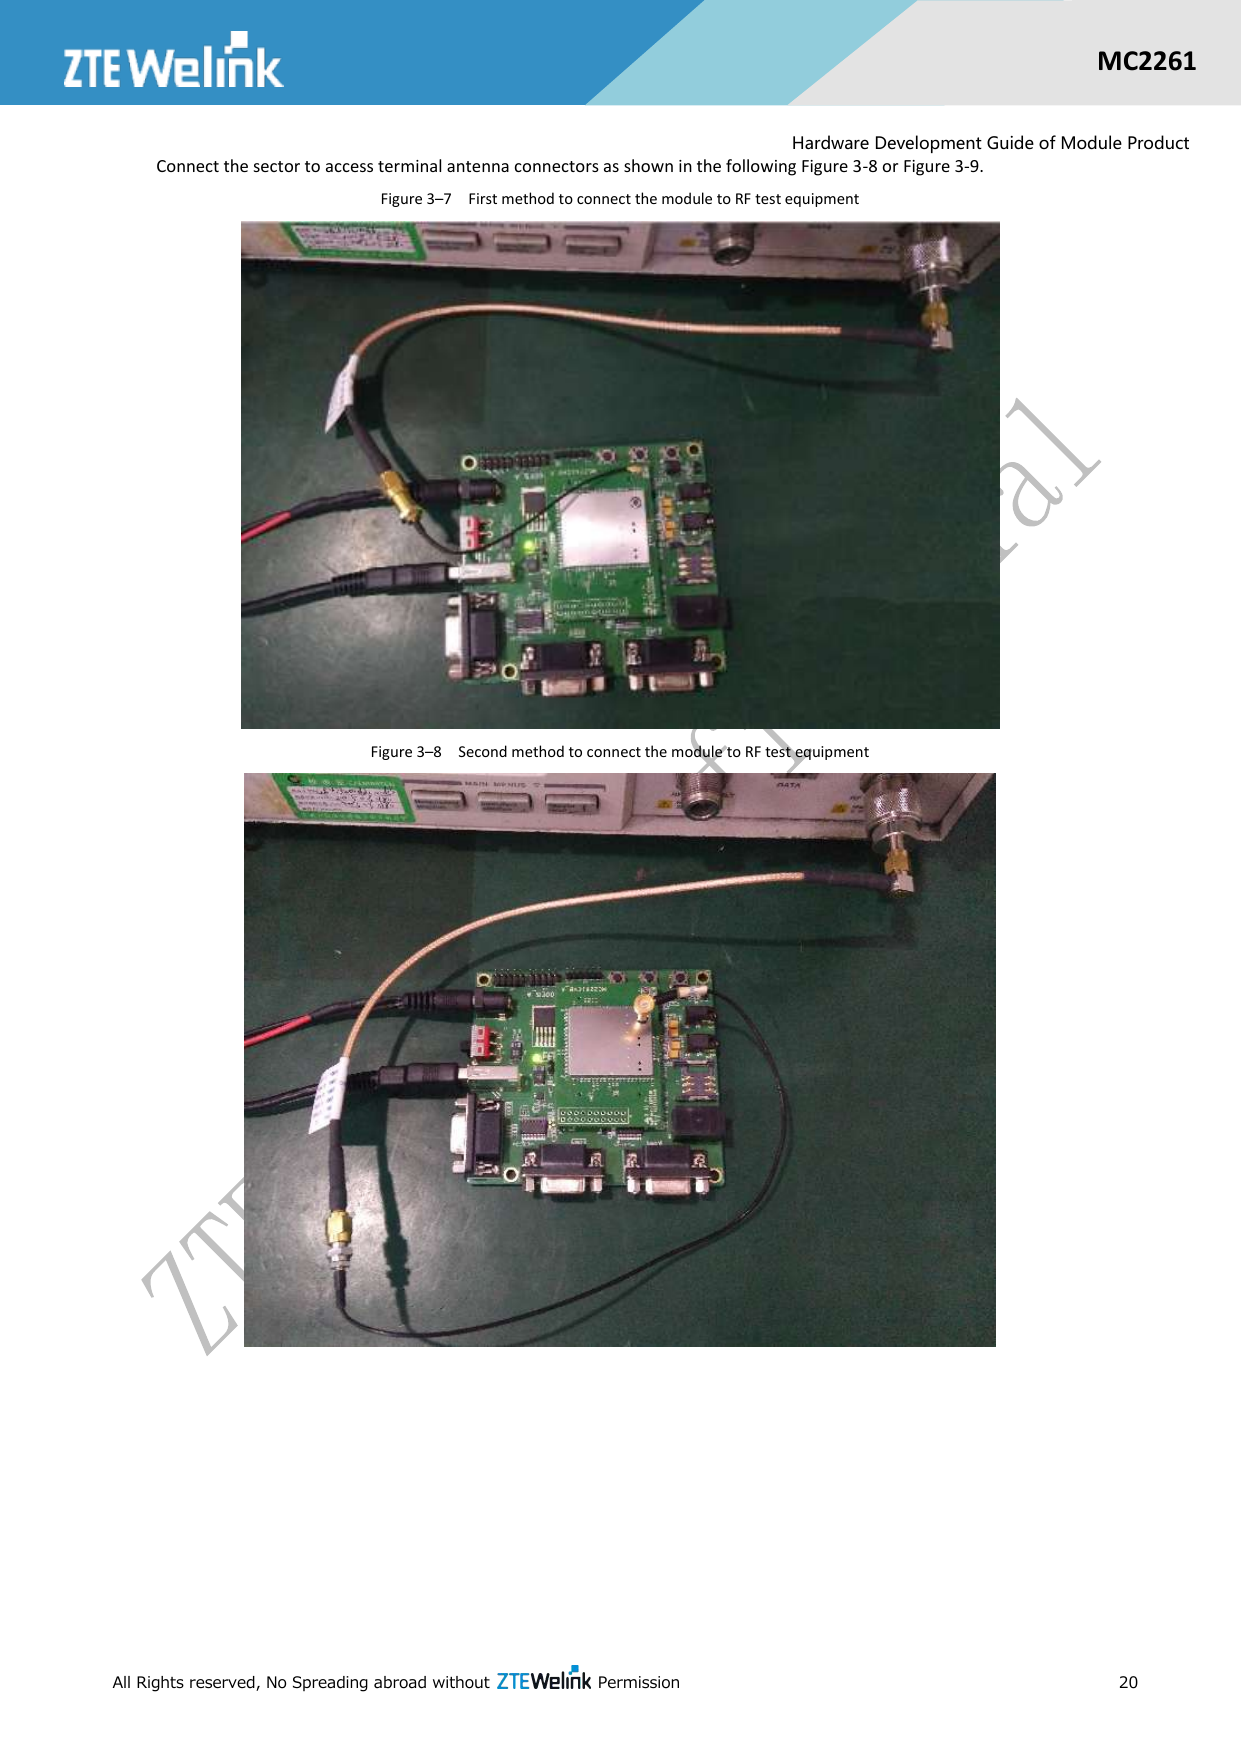  All Rights reserved, No Spreading abroad without    Permission      20  MC2261  Hardware Development Guide of Module Product Connect the sector to access terminal antenna connectors as shown in the following Figure 3-8 or Figure 3-9. Figure 3–7  First method to connect the module to RF test equipment  Figure 3–8  Second method to connect the module to RF test equipment   